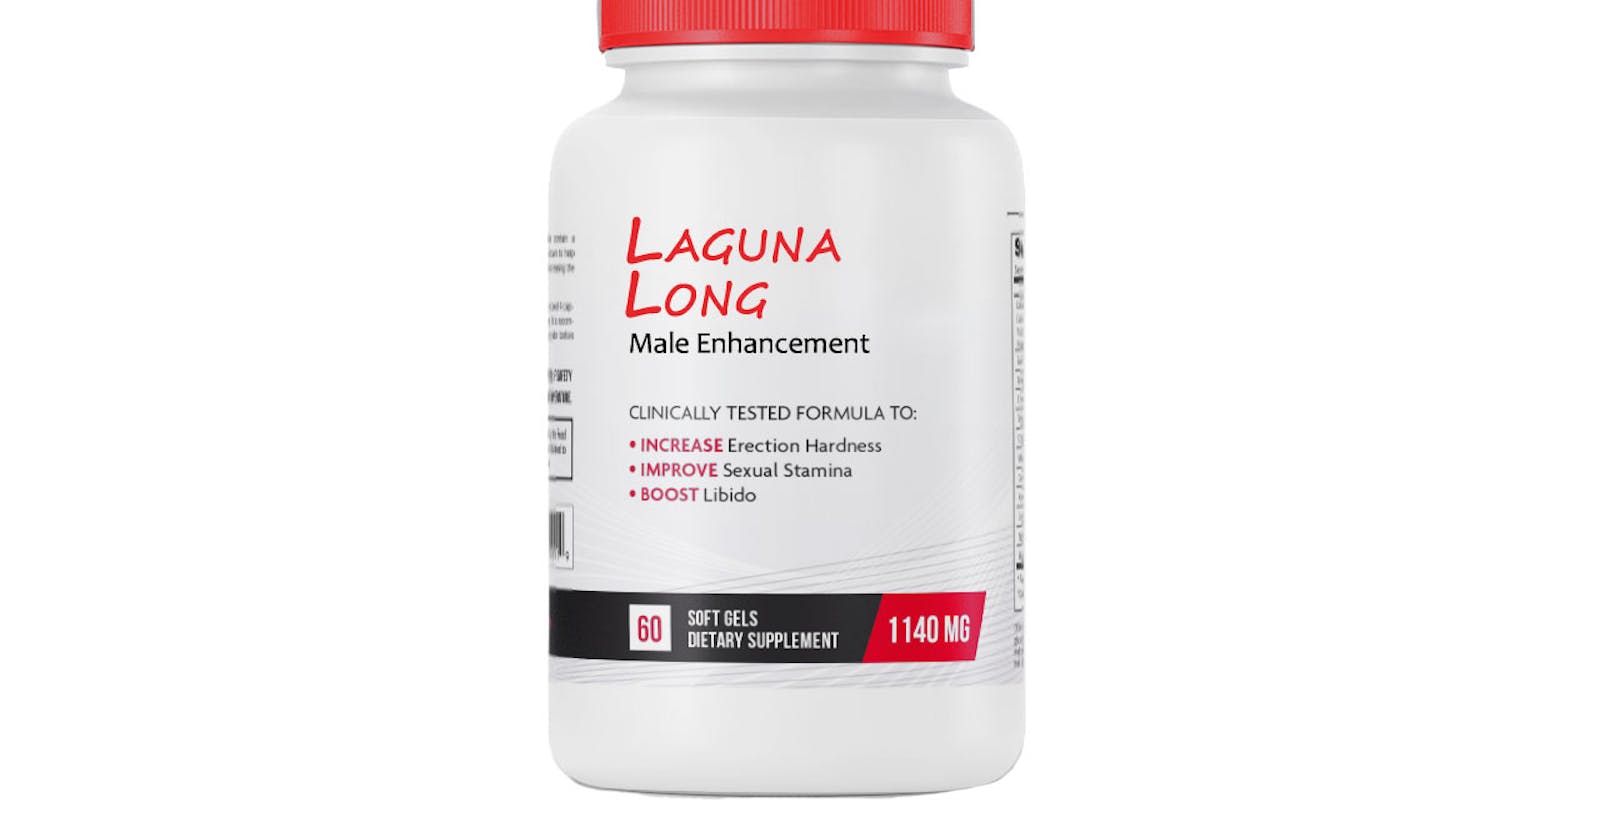 Laguna Long Male Enhancement Reviews - Cost & Offers, Buy?